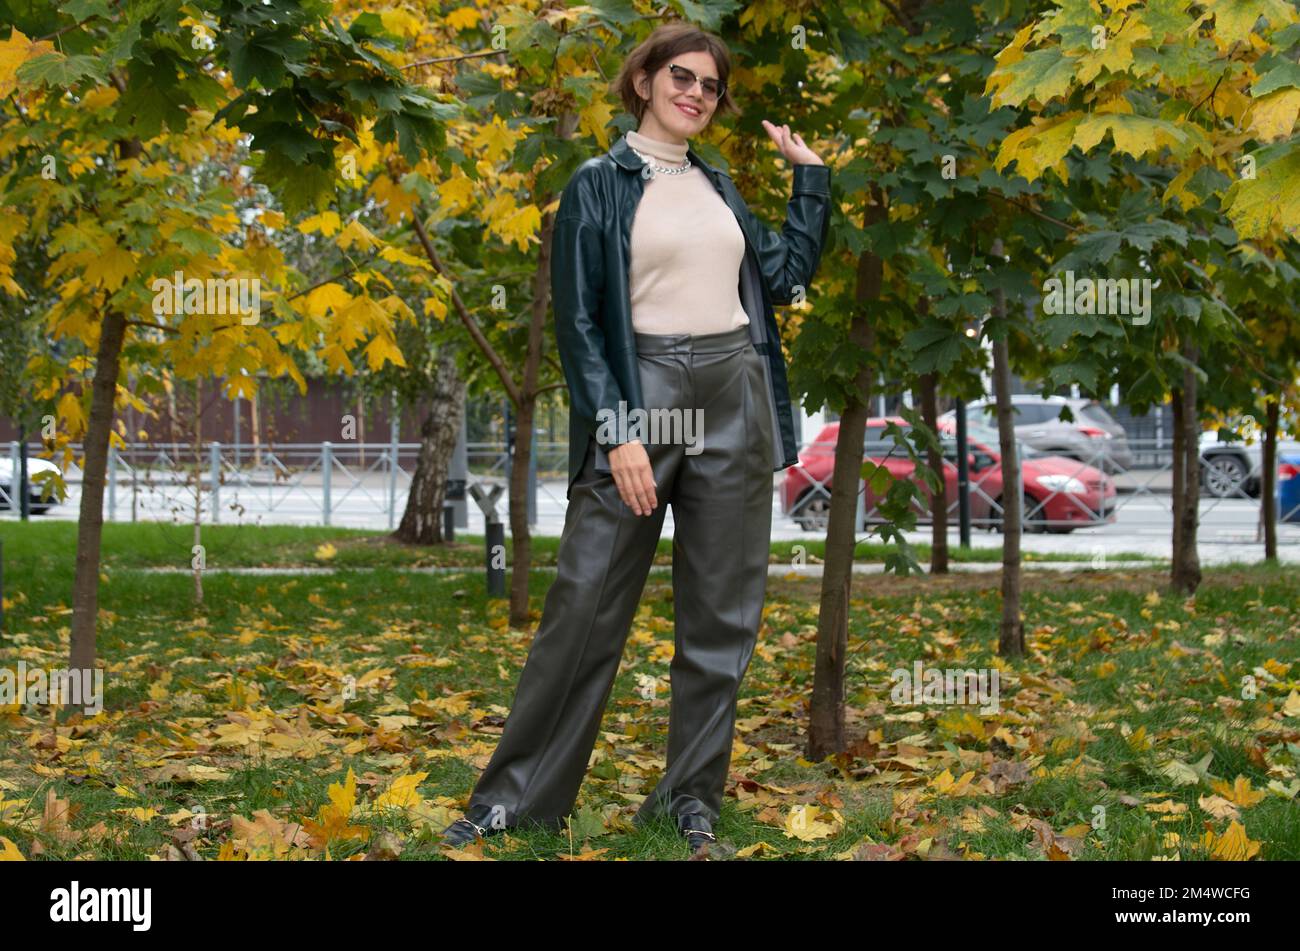 A woman in leather clothes stands against the backdrop of an autumn maple square Stock Photo